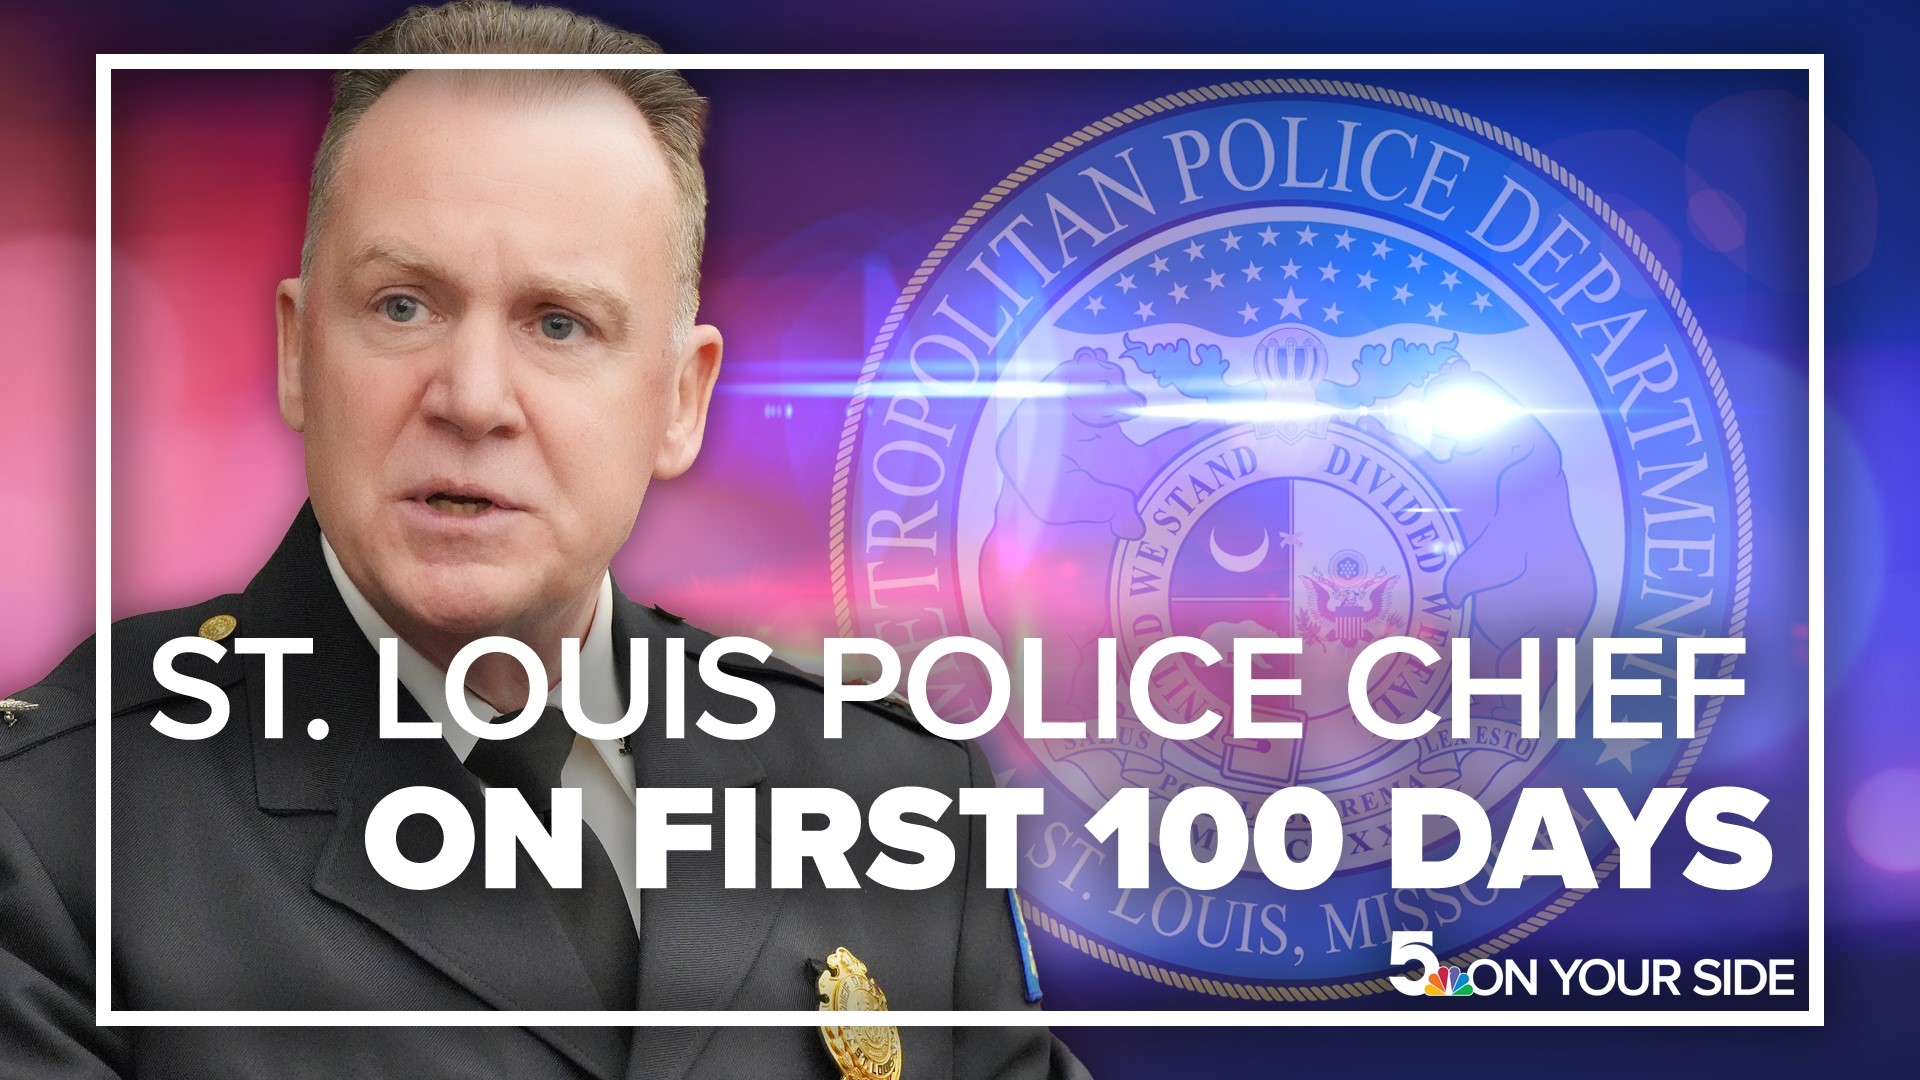 St. Louis police Chief Robert Tracy on Friday talked about his first 100 days as the head of the department.